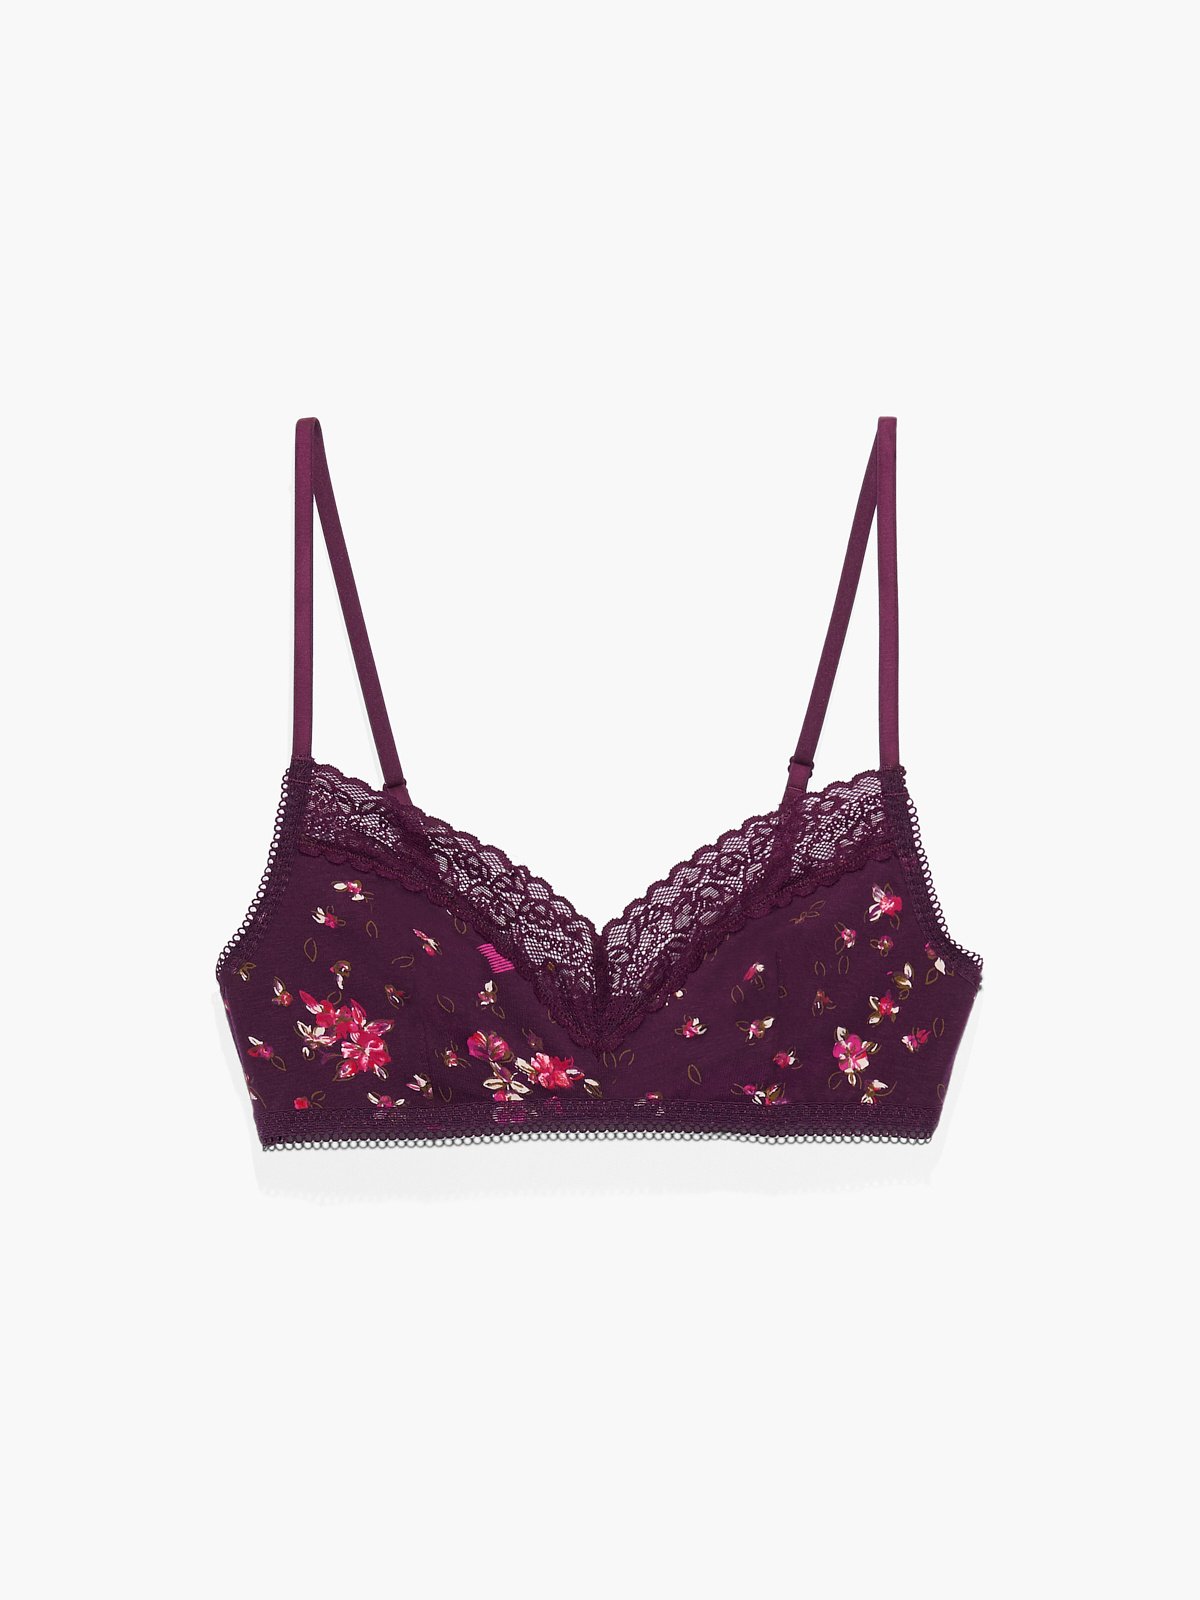 SAVAGE X FENTY unicorn lavender pink Floral Lace and Mesh bralette 2X NEW